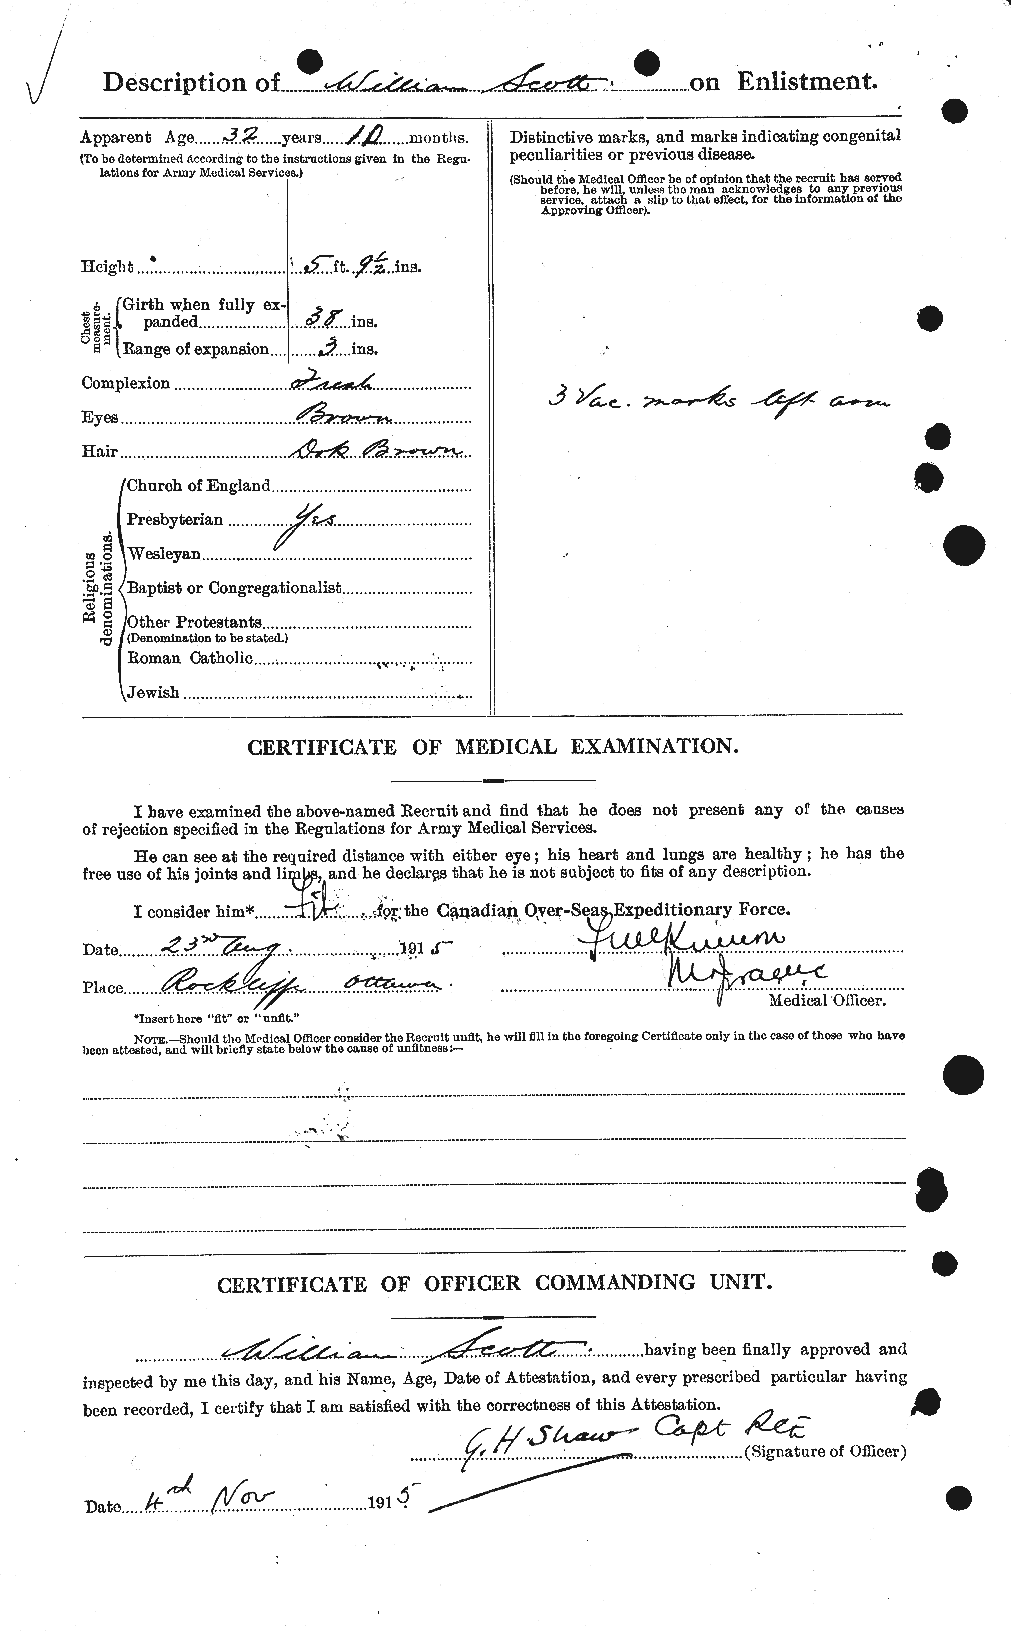 Personnel Records of the First World War - CEF 087371b